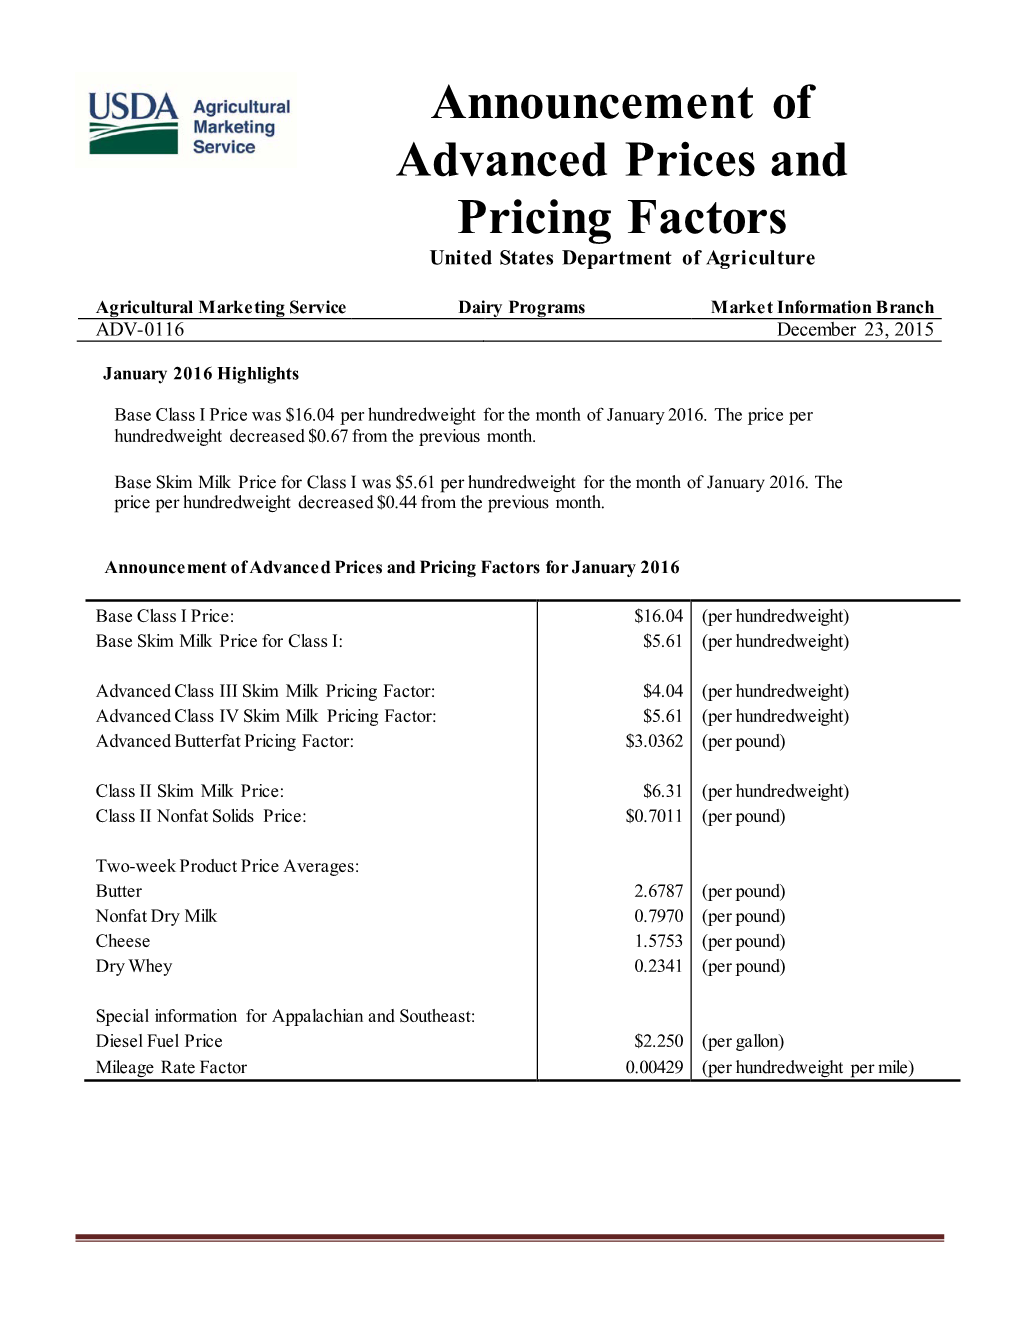 Announcement of Advanced Prices and Pricing Factors United States Department of Agriculture